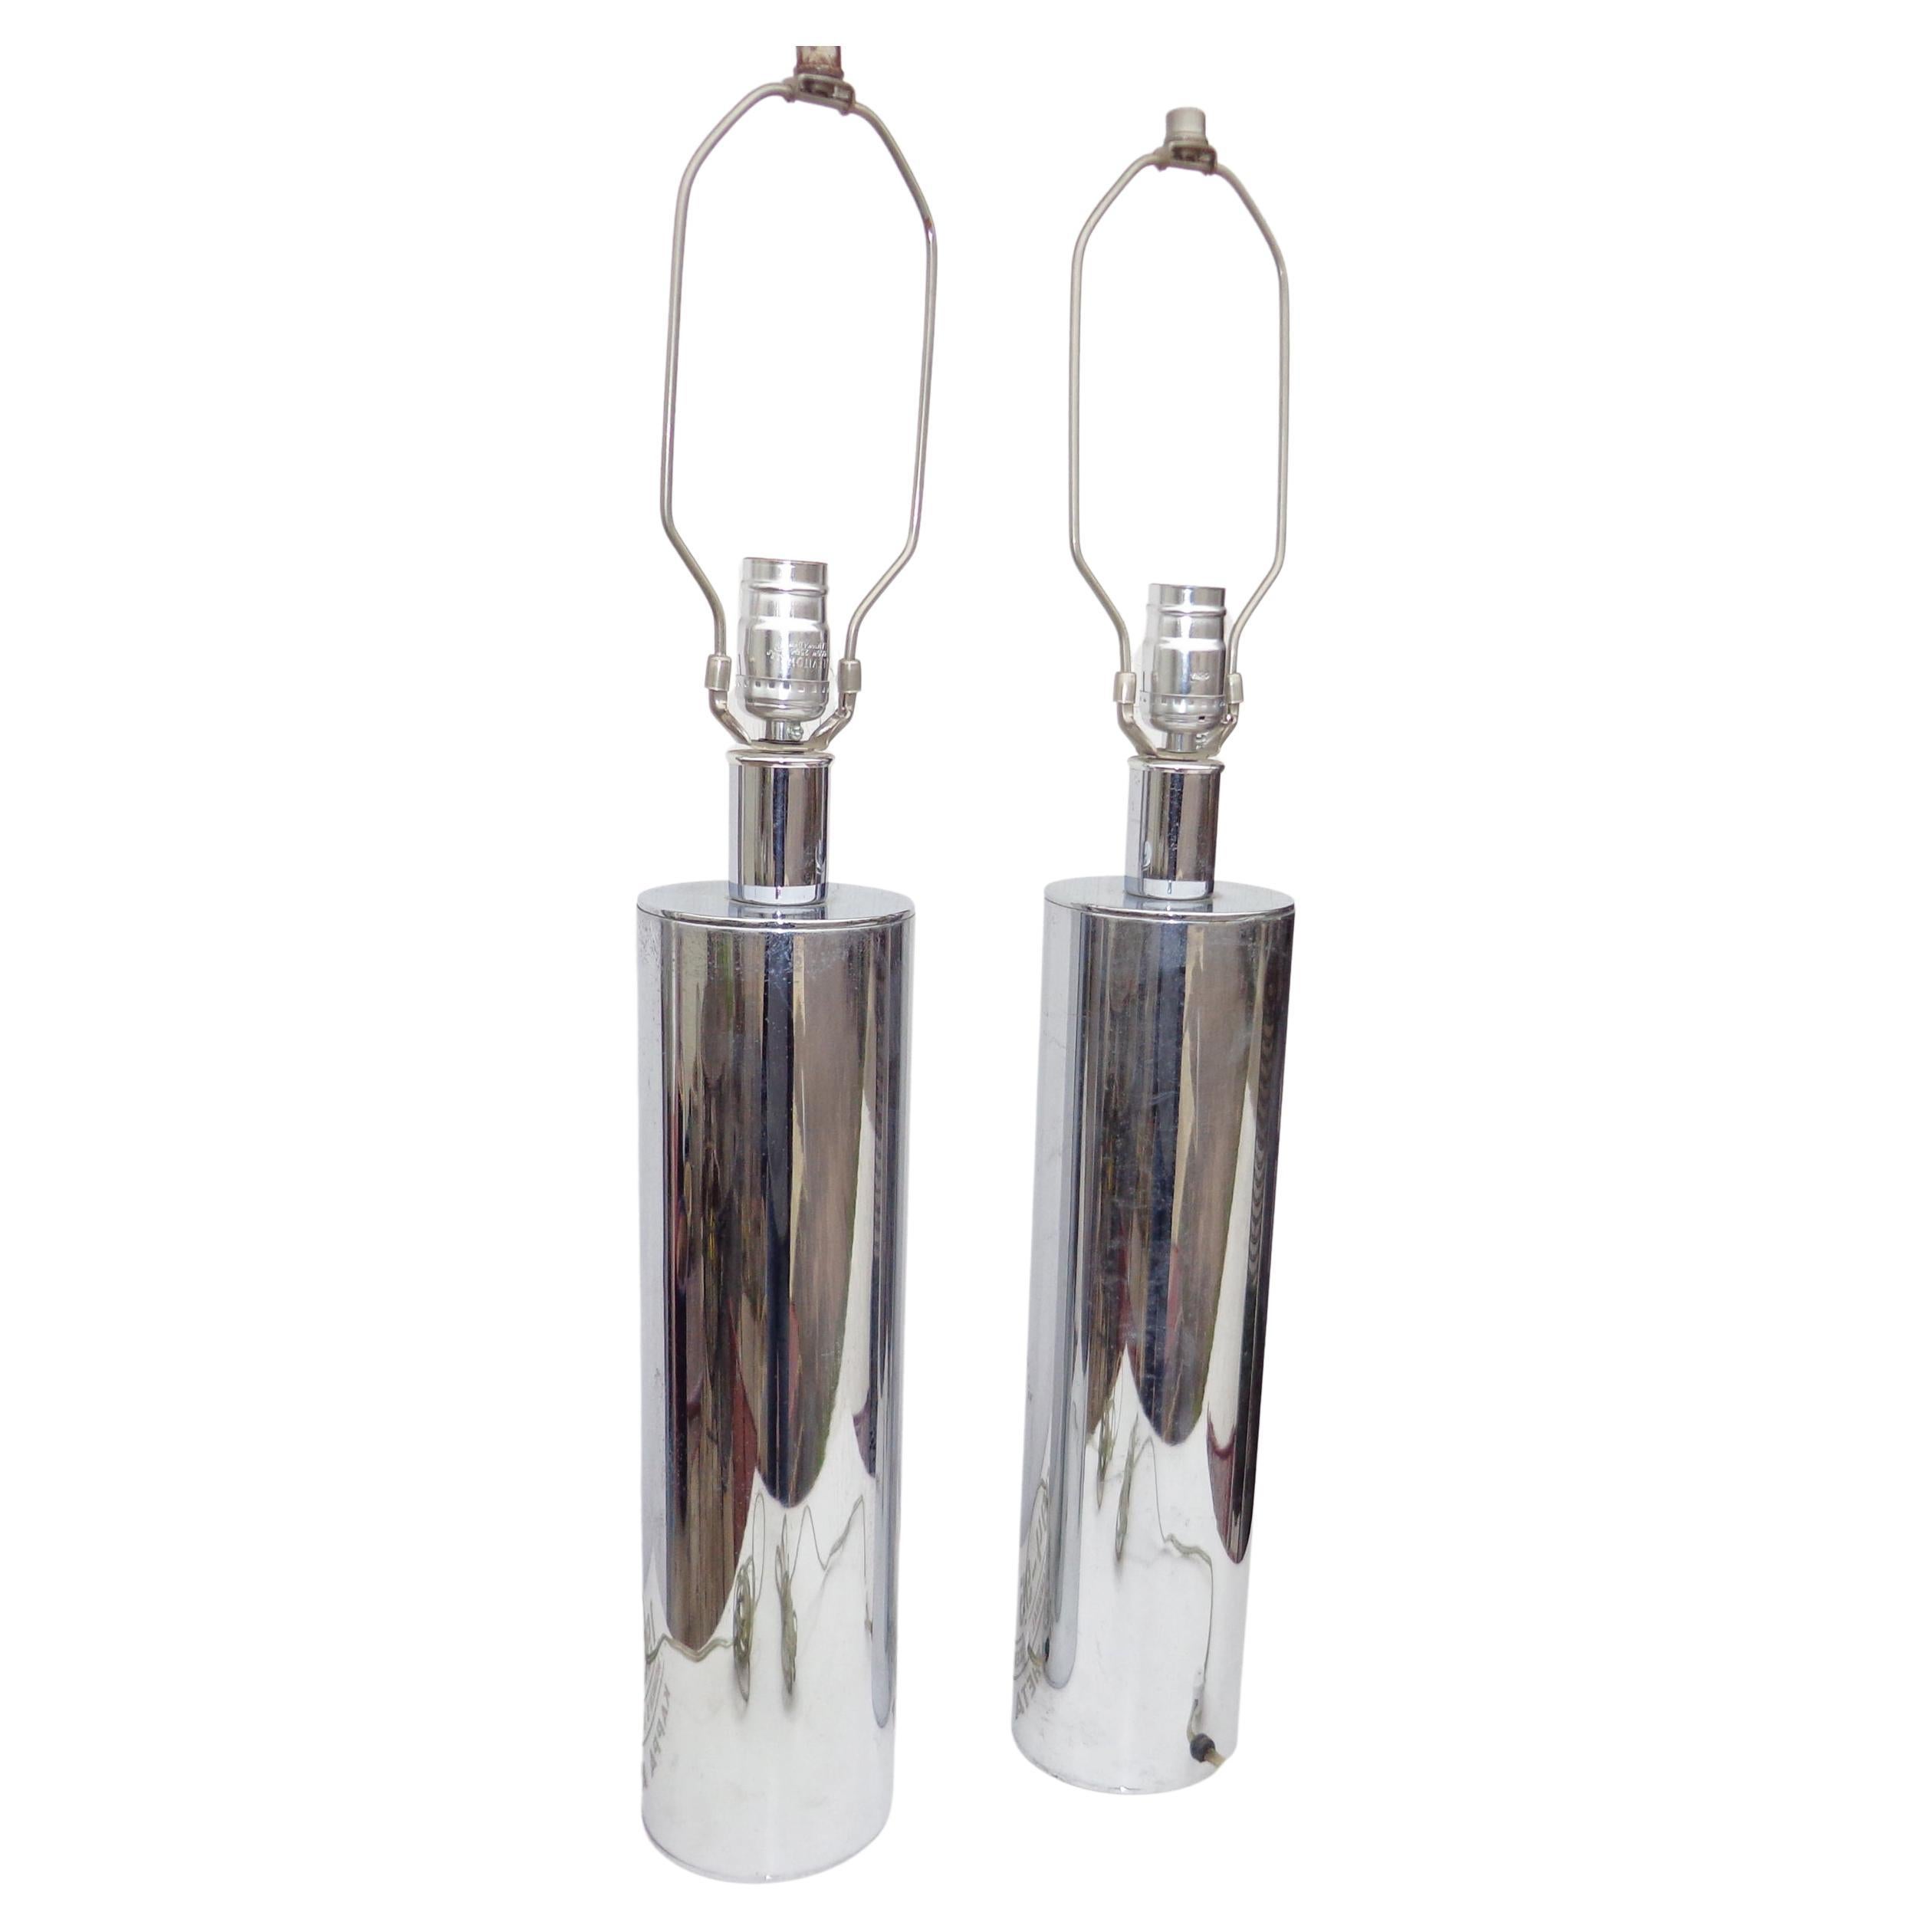 Pair of George Kovacs Chrome Cylinder Lamps For Sale